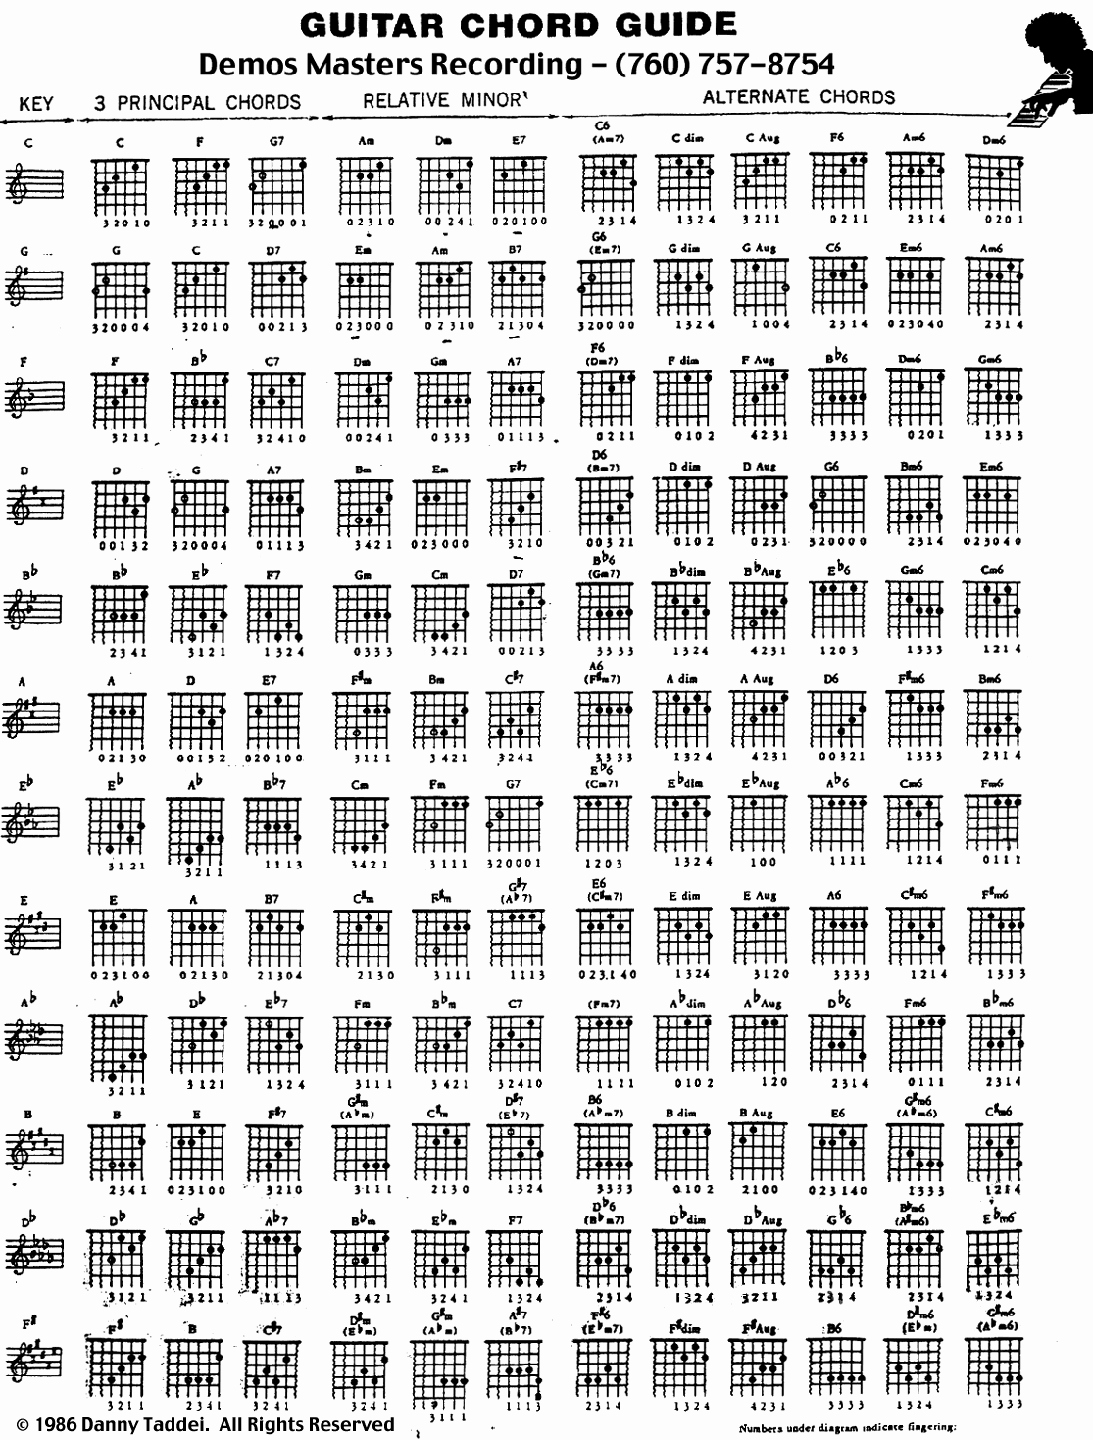 Complete Guitar Chords Charts Lovely Plete Acoustic Guitar Chords Chart